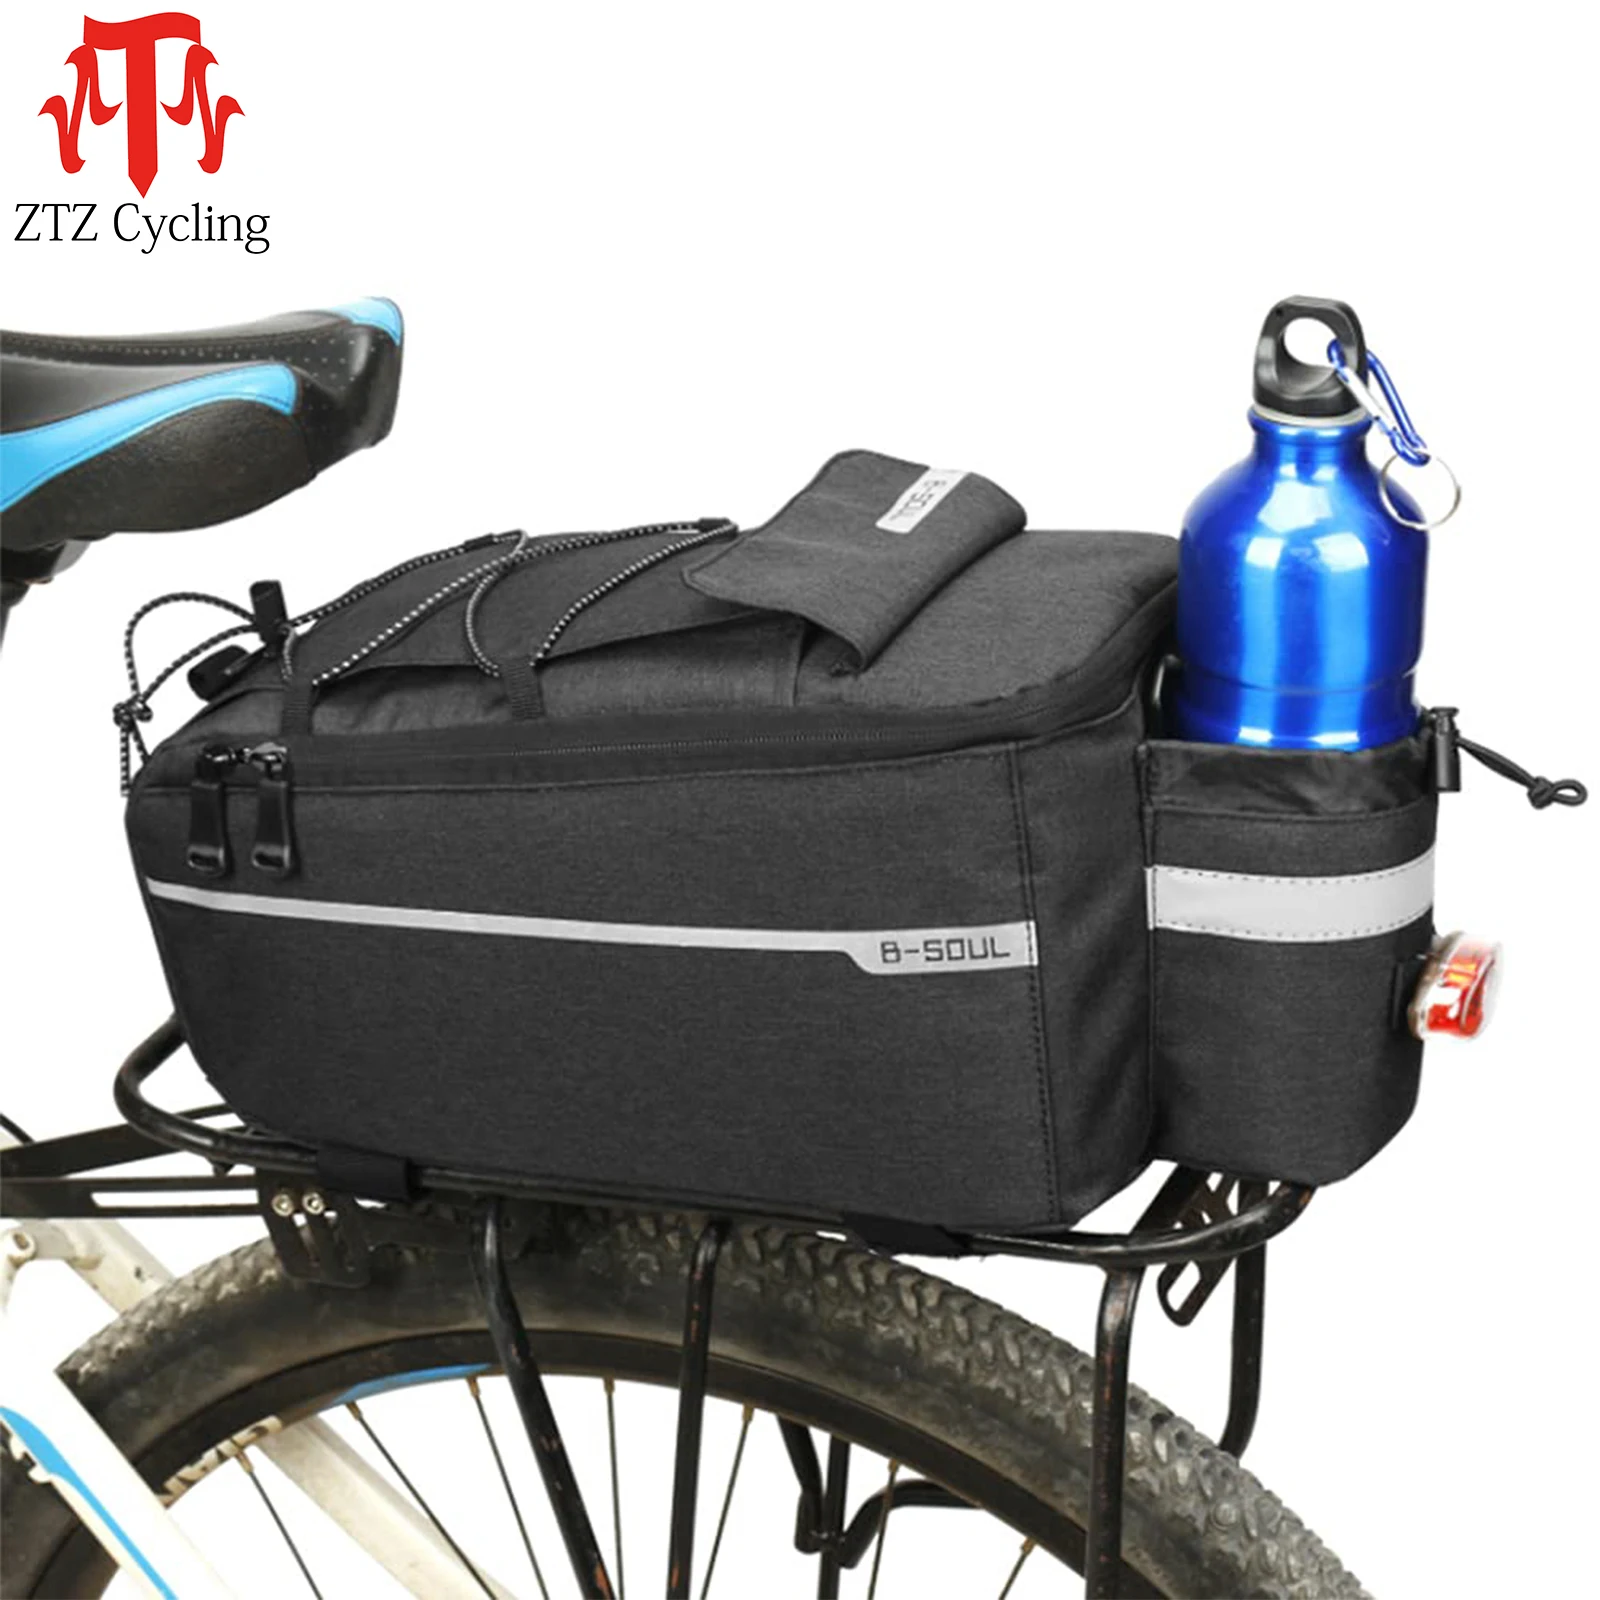 

ZTZ 8L Bike Rack Bag, Bicycle Rear Rack Storage Luggage，Insulated Bicycle Trunk Bag Waterproof with Reflective Stripes